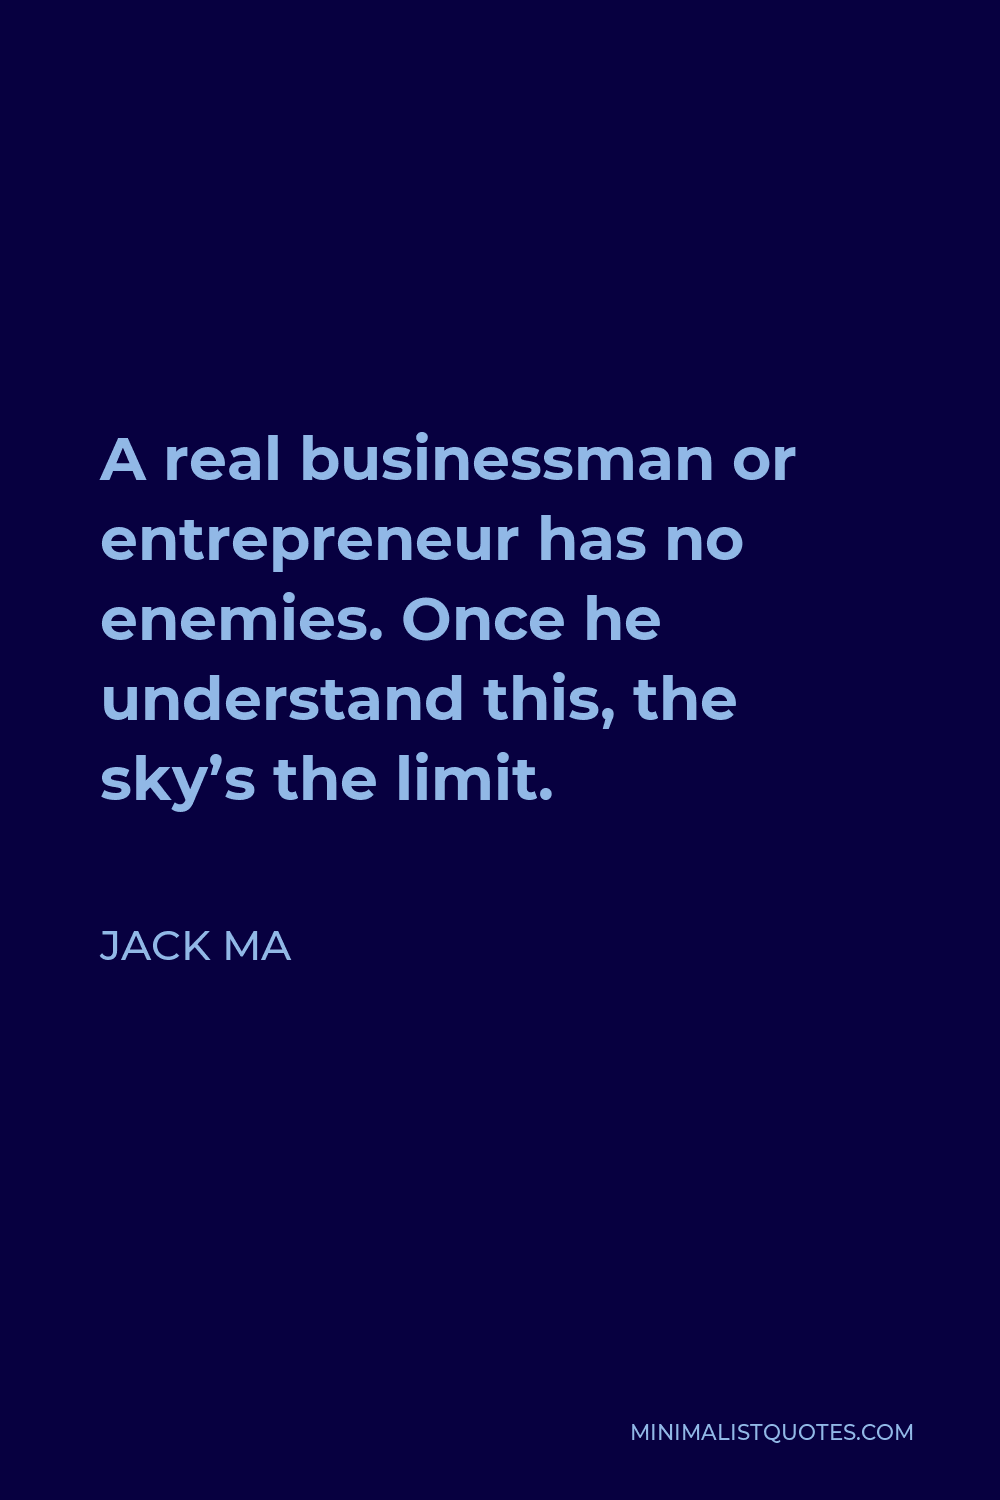 Jack Ma Quote - A real businessman or entrepreneur has no enemies. Once he understand this, the sky’s the limit.